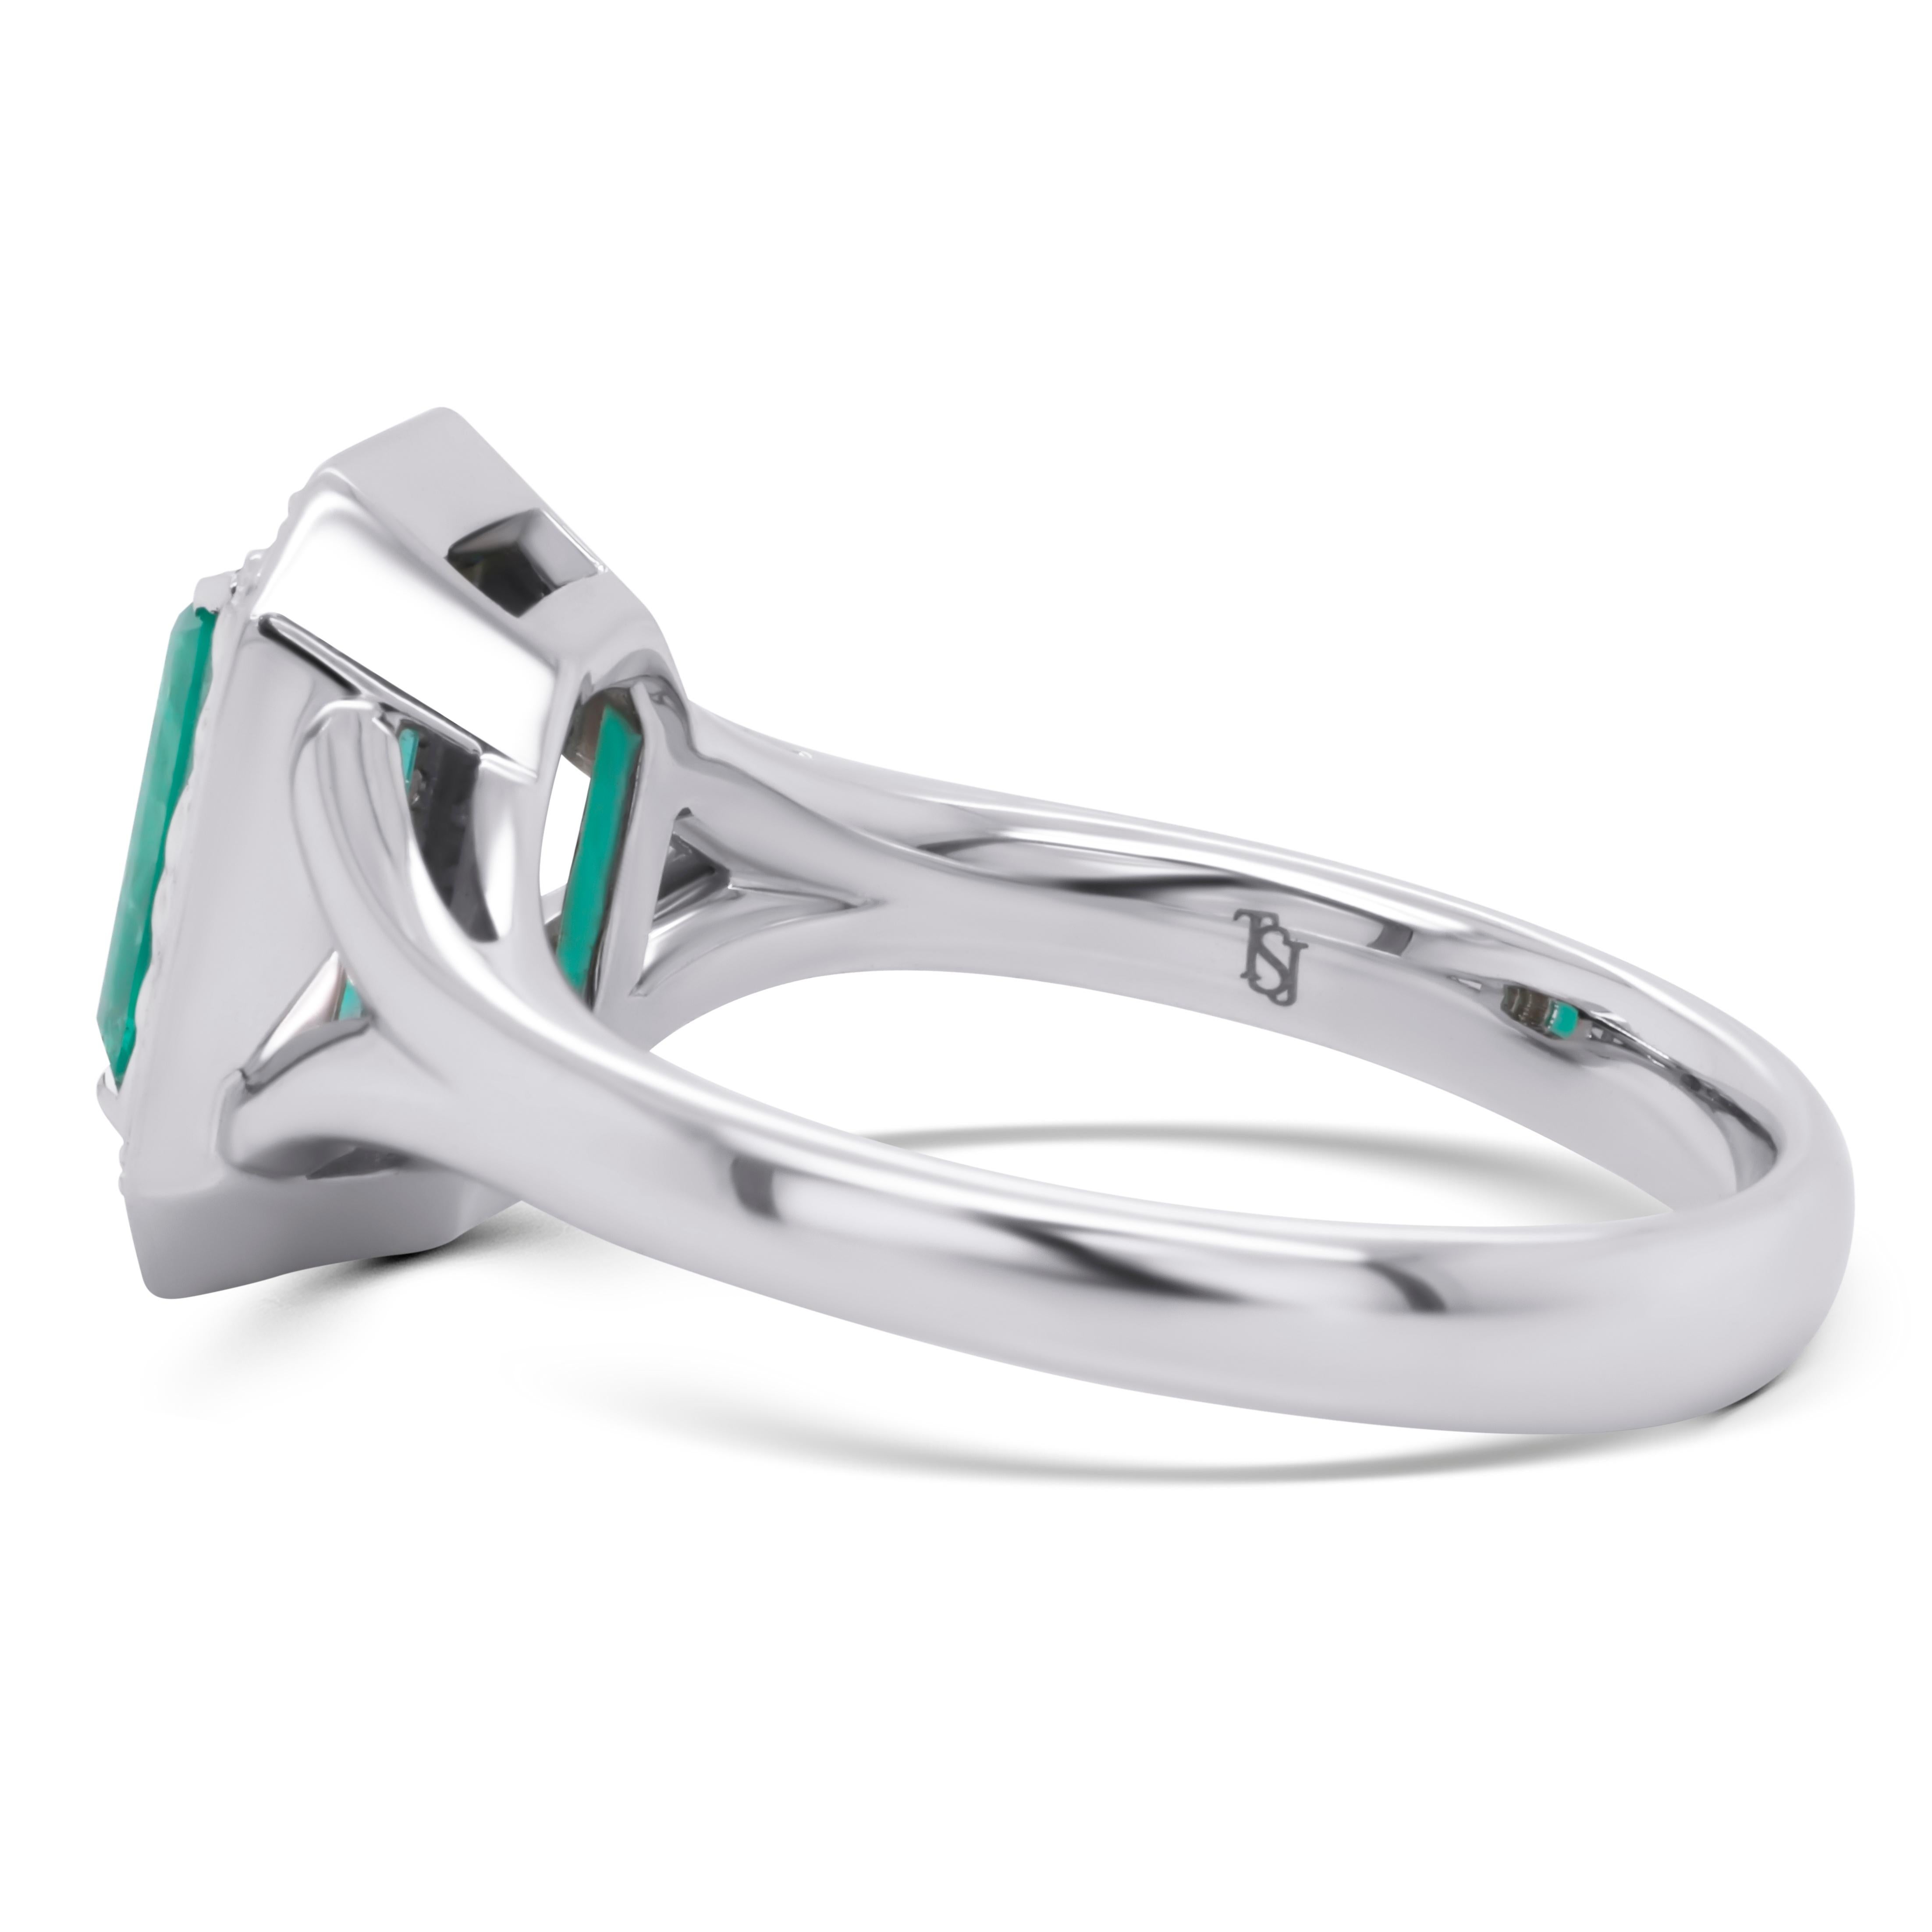 A classic emerald cut Emerald enclosed in a timeless design Ring.

The center stone is a saturated green Emerald from the Ural Mountains, Russia – a picturesque region with a rich history where these emeralds are sourced and prized for their rarity